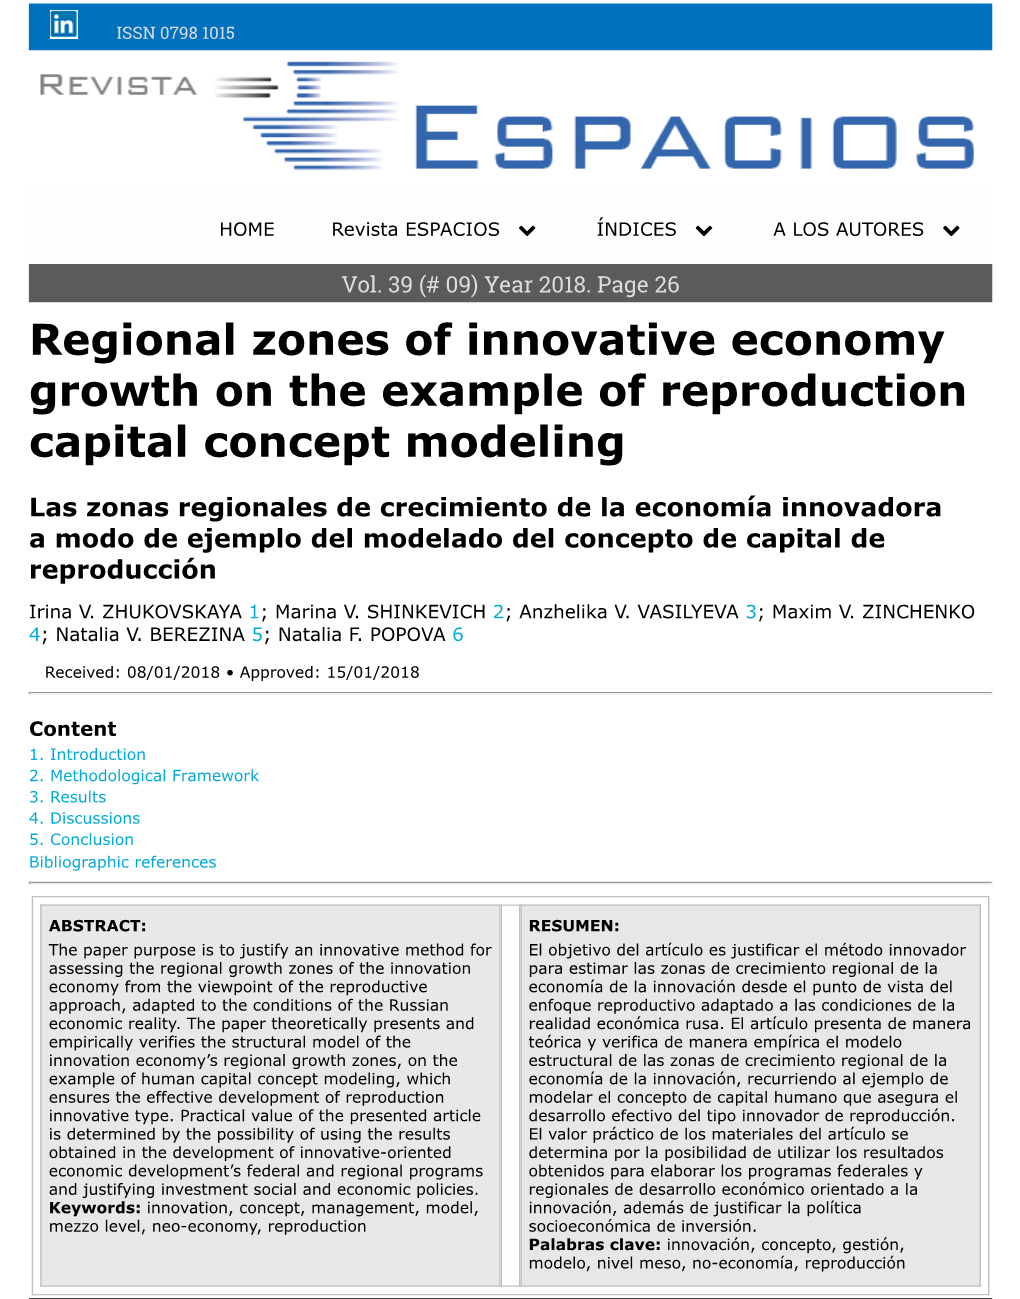 Regional Zones of Innovative Economy Growth on the Example of Reproduction Capital Concept Modeling